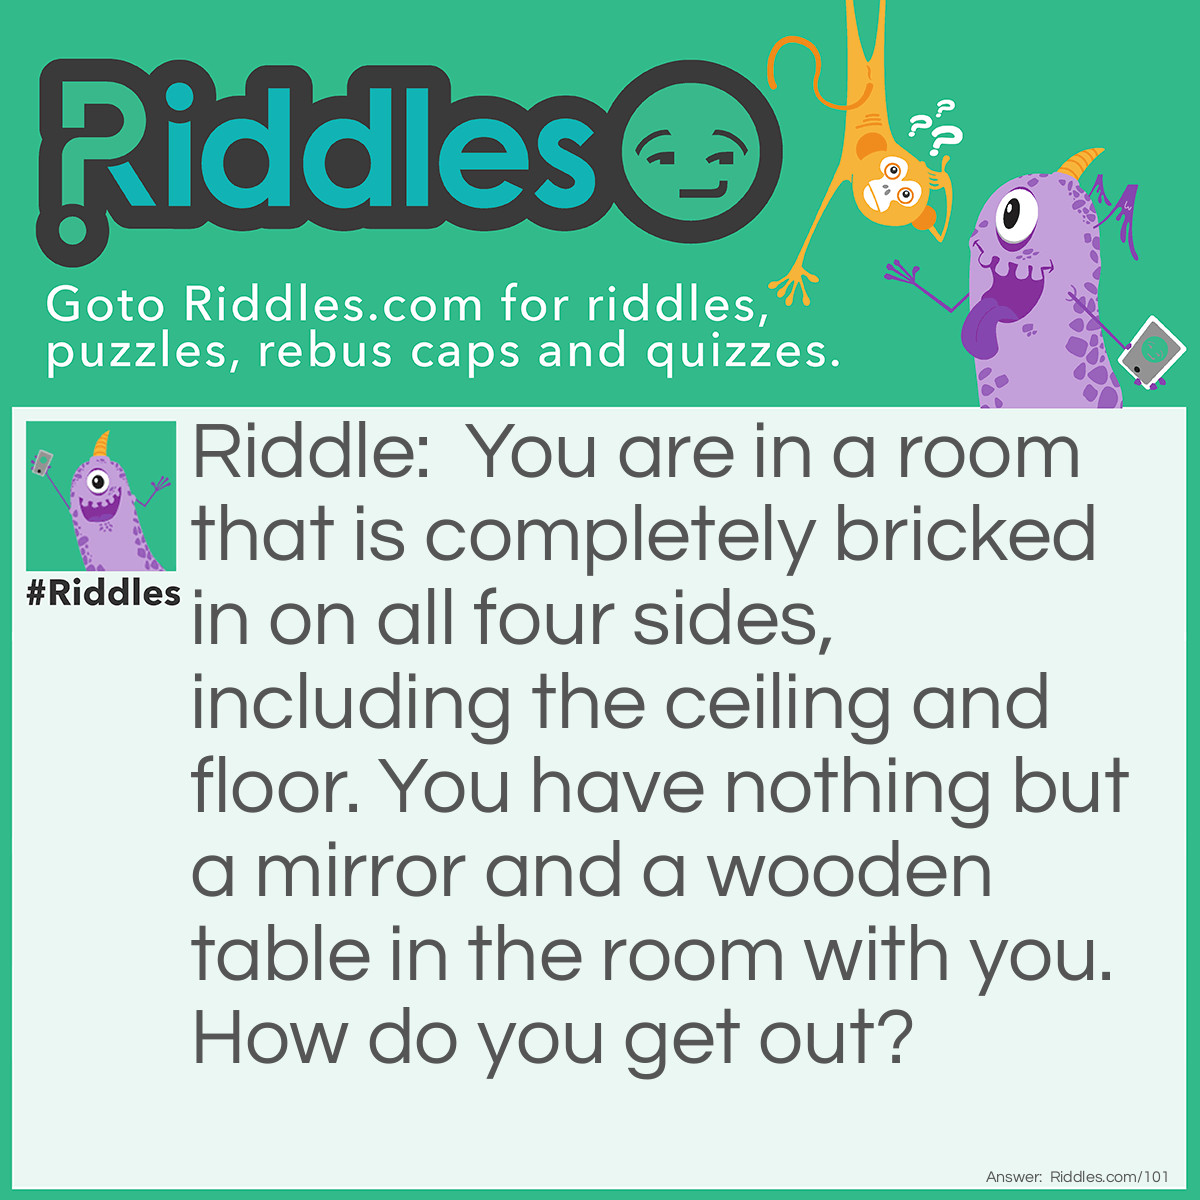 Riddle: You are in a room that is completely bricked in on all four sides, including the ceiling and floor. You have nothing but a mirror and a wooden table in the room with you. How do you get out? Answer: You look in the mirror you see what you saw, you take the saw and you cut the table in half, two halves make a whole, and you climb out the hole.